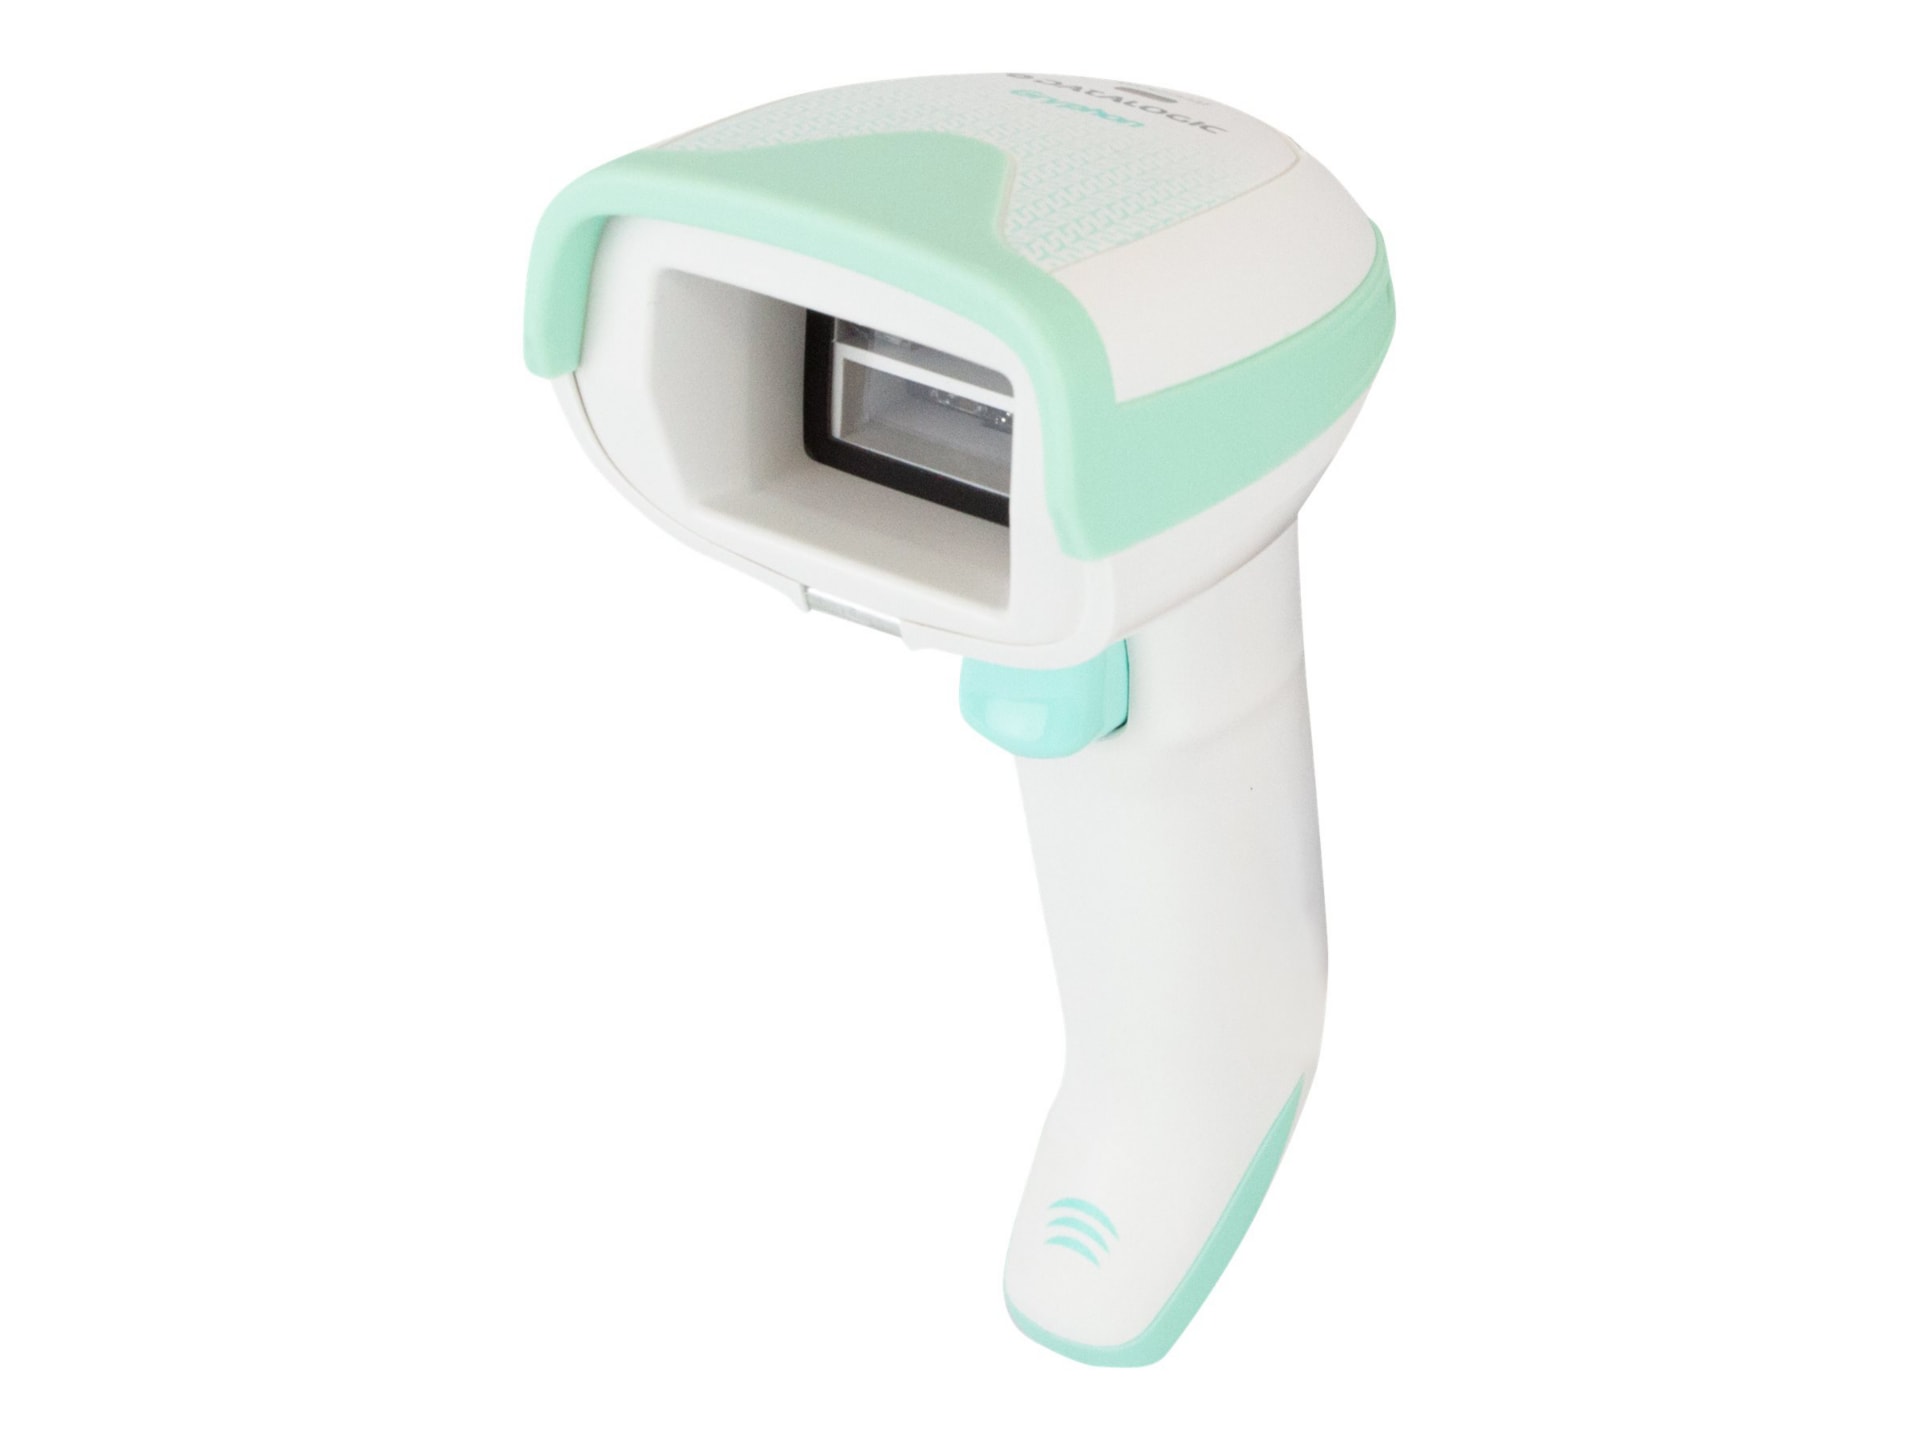 Datalogic Gryphon GD4520 Handheld Barcode Scanner with USB Only Interface